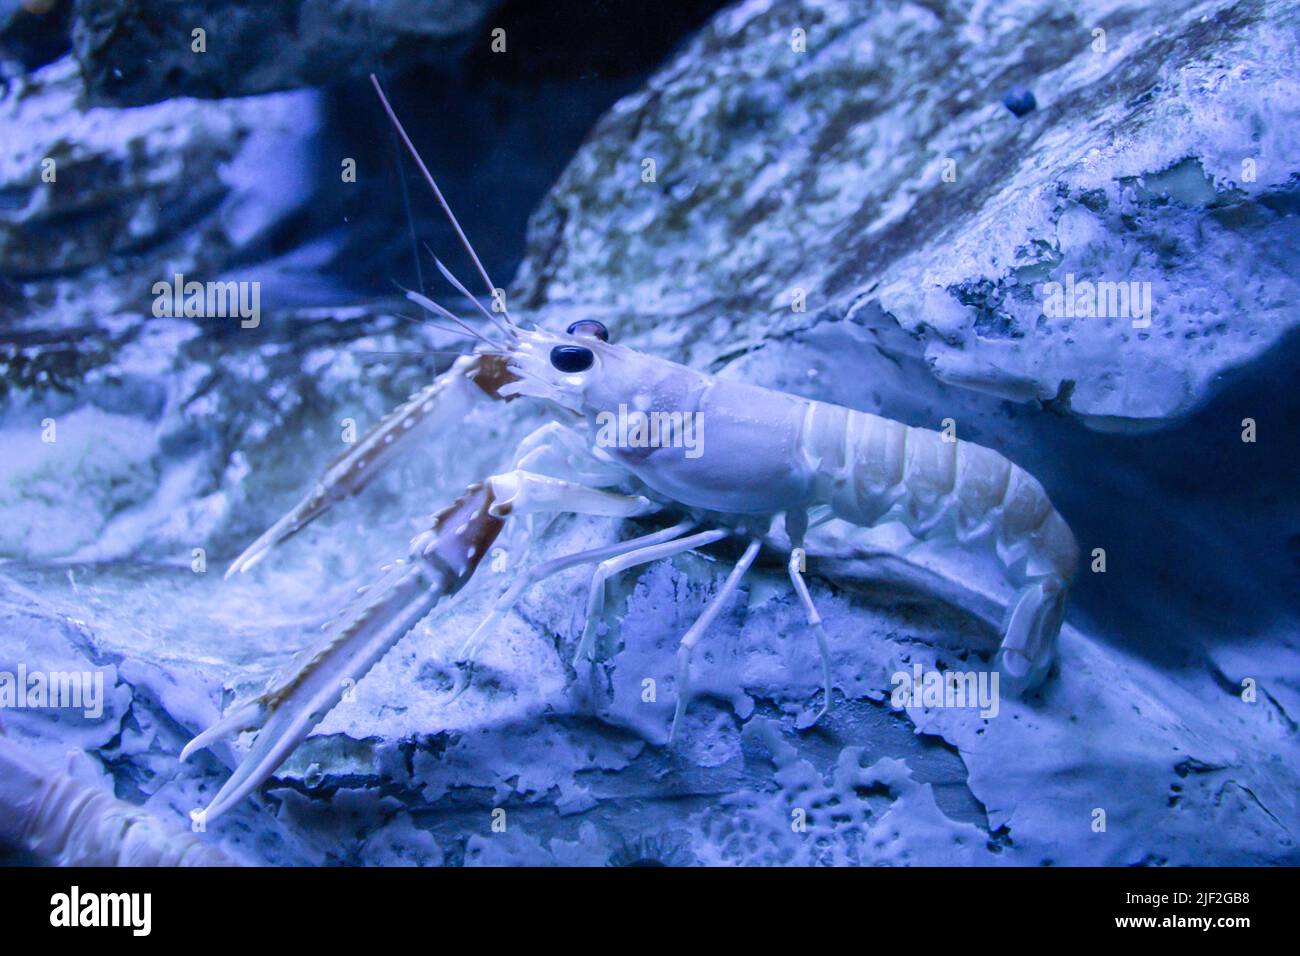 Langoustine close-up view in ocean. Sea life Stock Photo